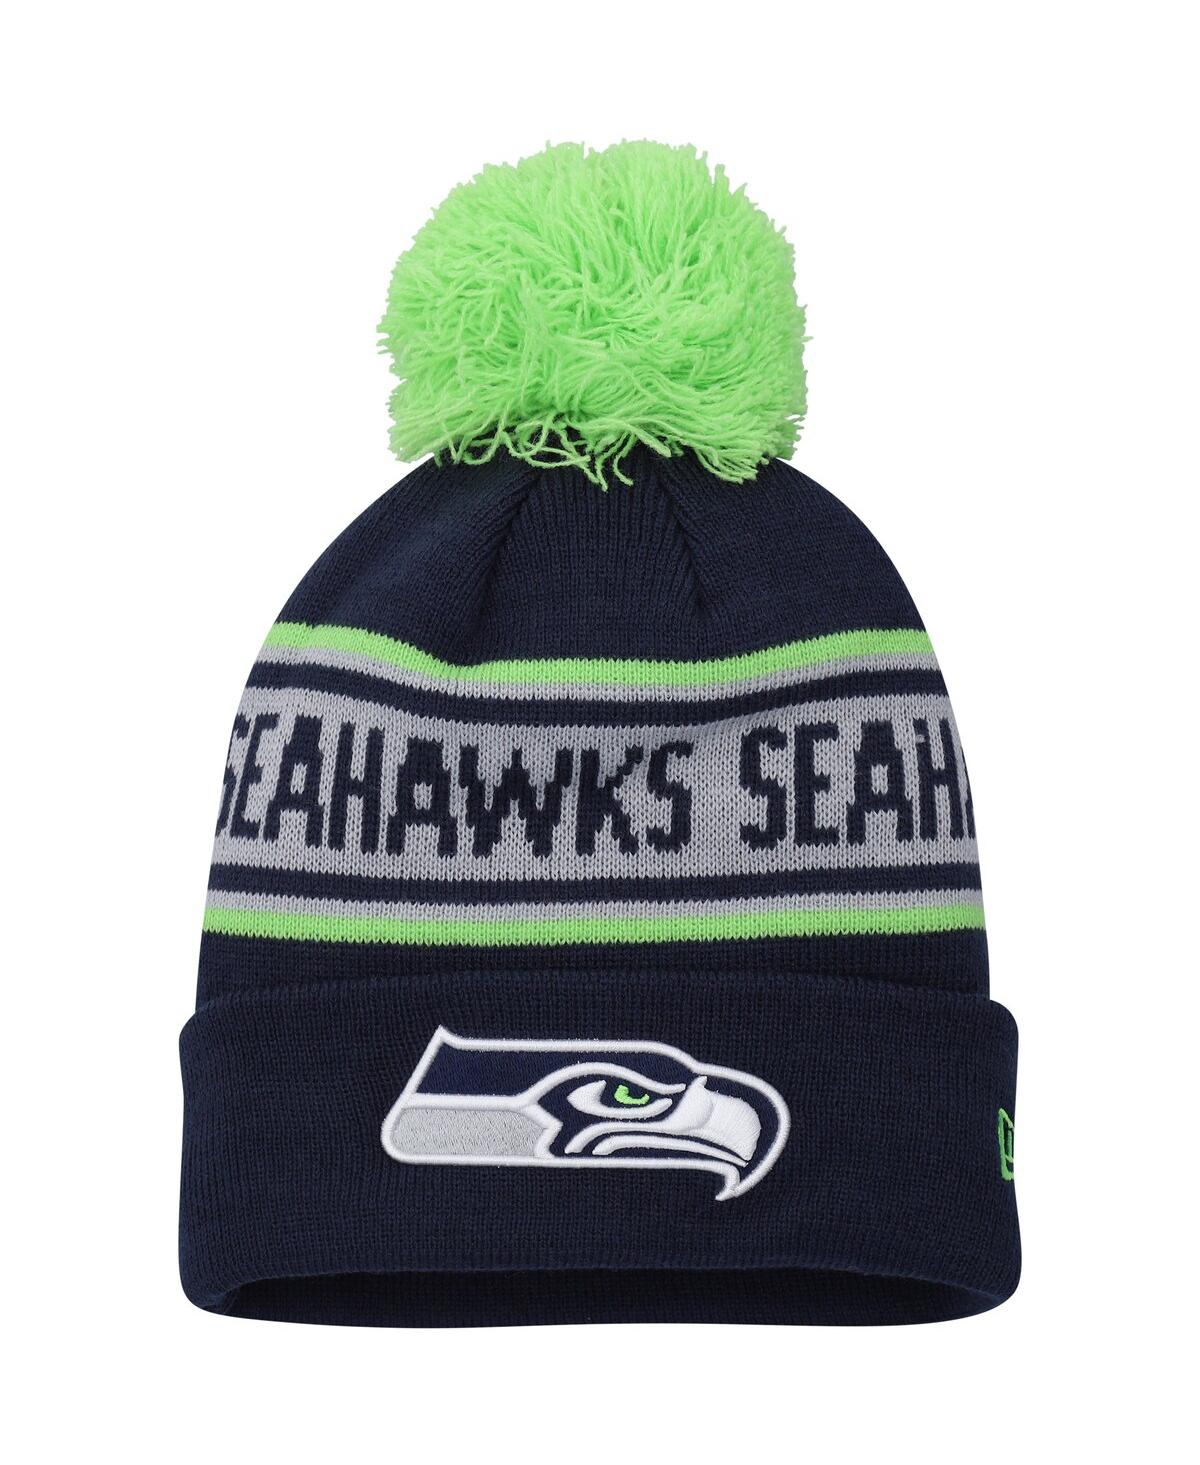 New Era Kids' Big Boys And Girls  College Navy Seattle Seahawks Repeat Cuffed Knit Hat With Pom